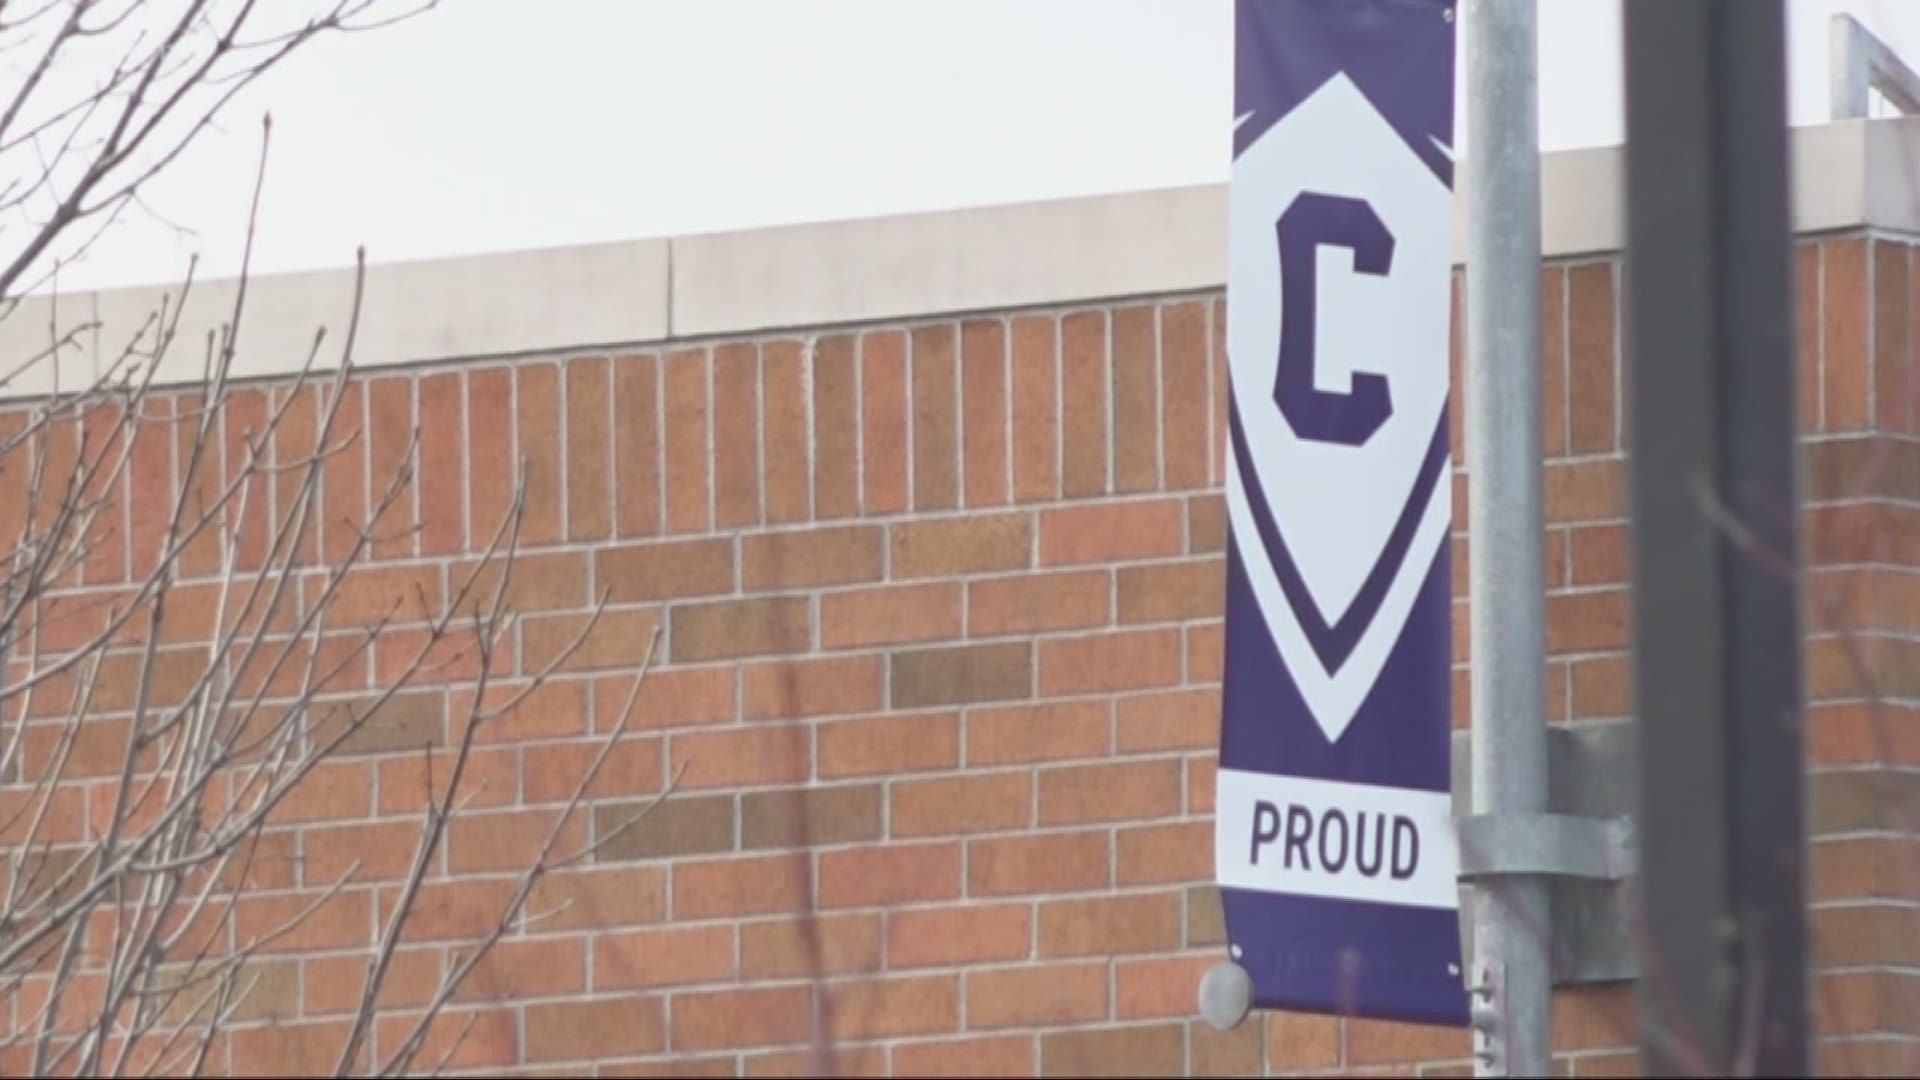 Students are devastated by the closure of Concordia University. Morgan Romero spoke with them and shares their stories.